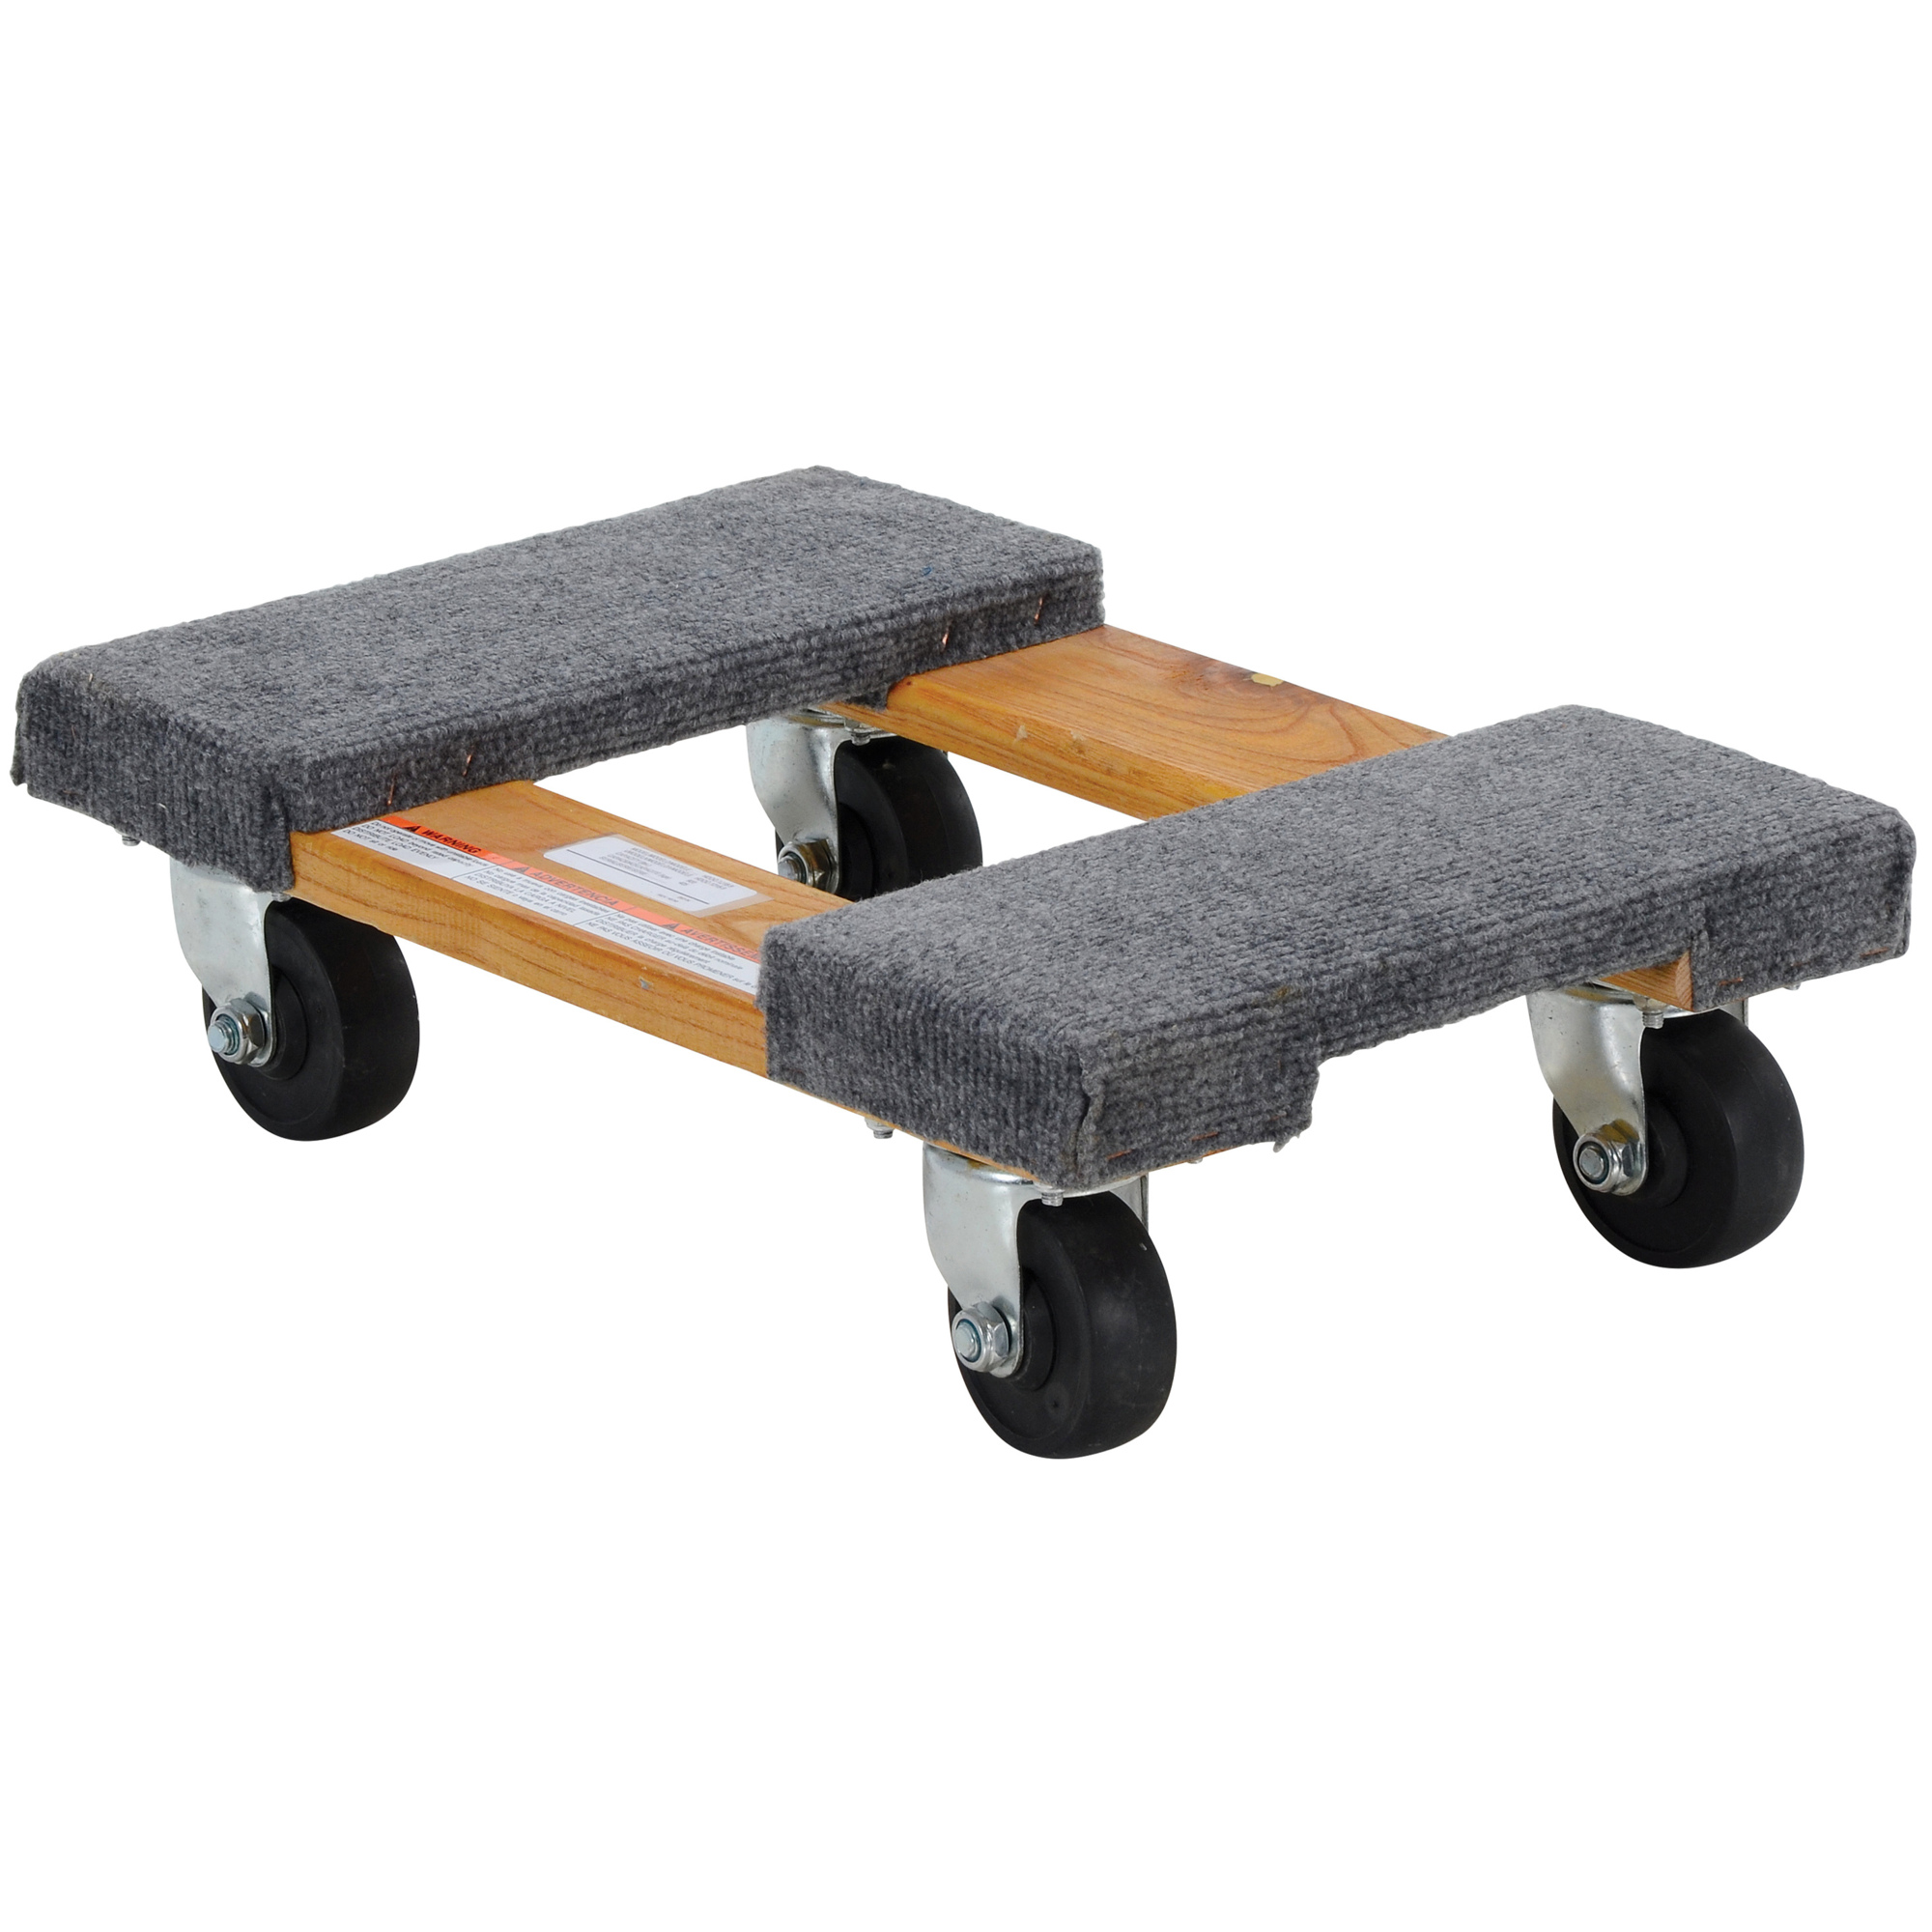 Vestil, Hardwood dolly with carpet ends 12Inch x 18Inch, Length 18 in, Width 12 in, Load Capacity 900 lb, Model HDOC-1218-9